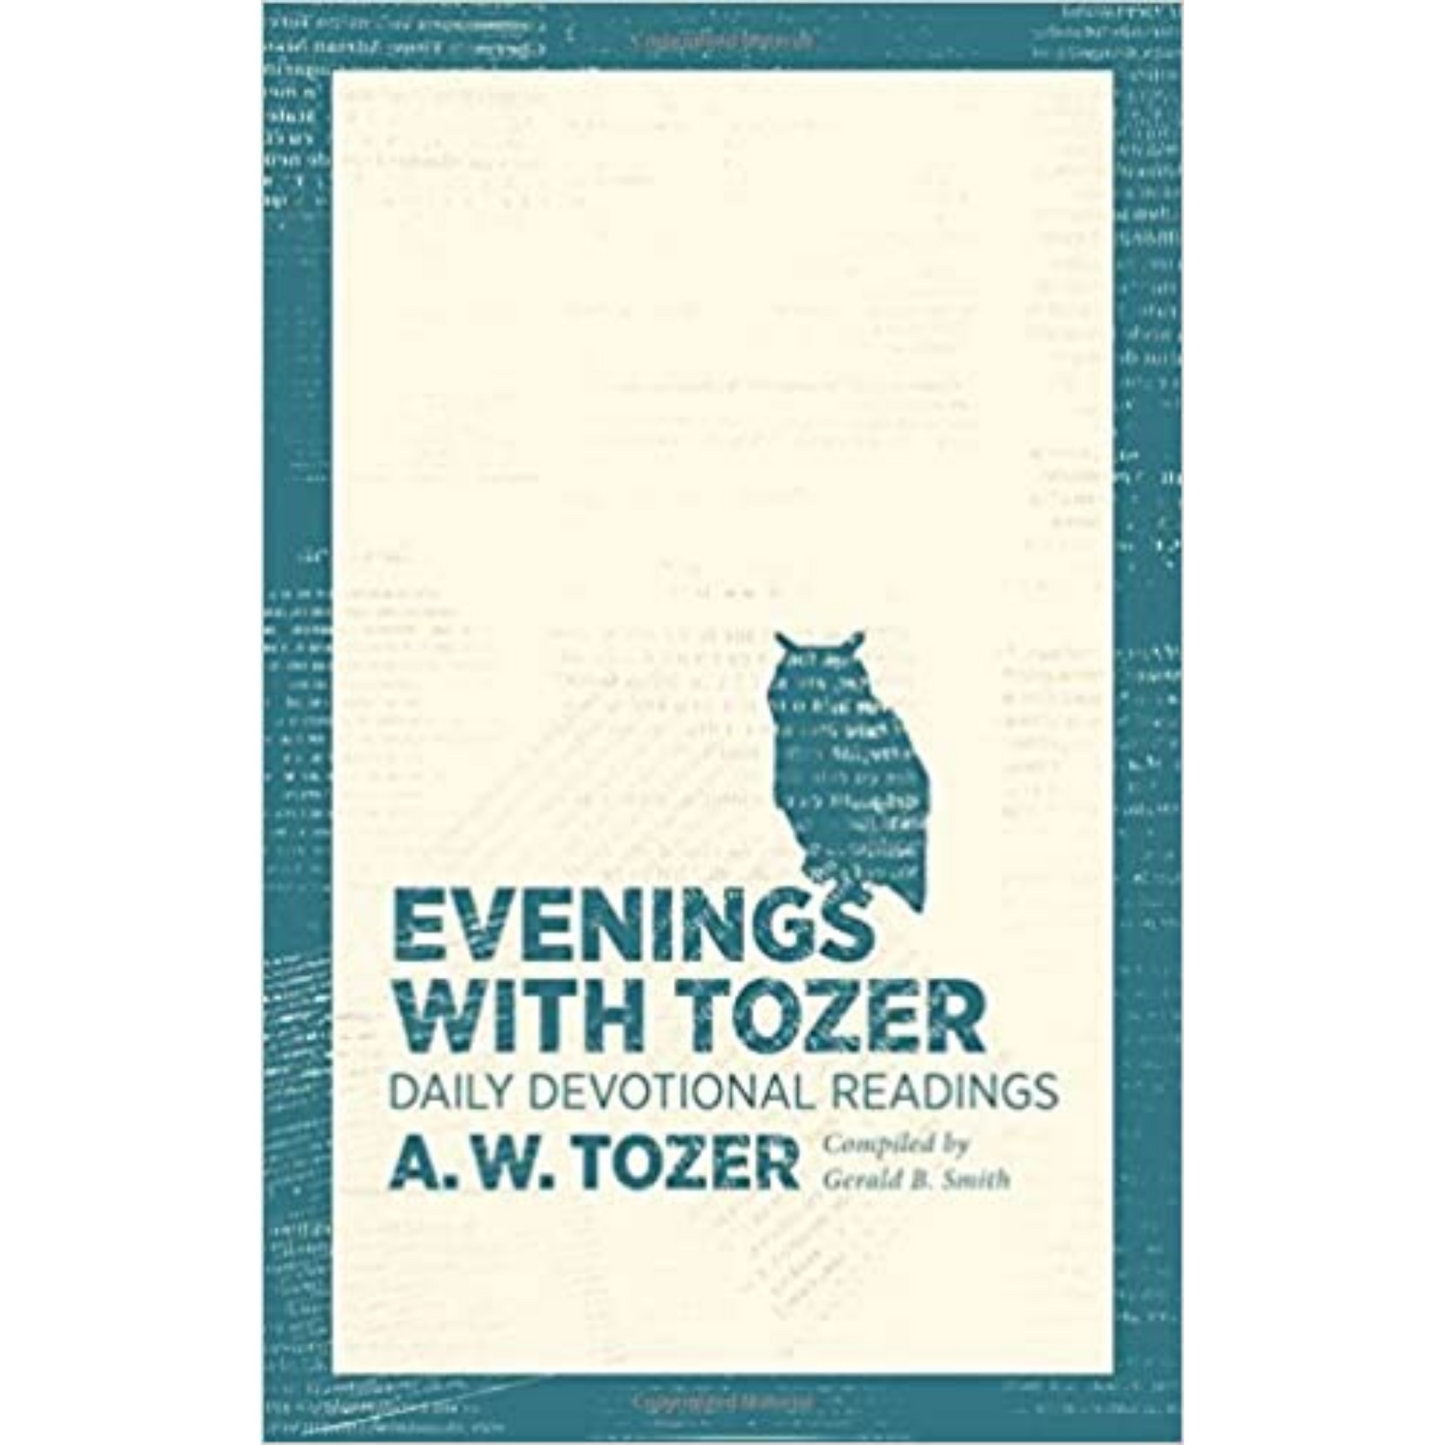 Evenings With Tozer - Daily Devotional Readings